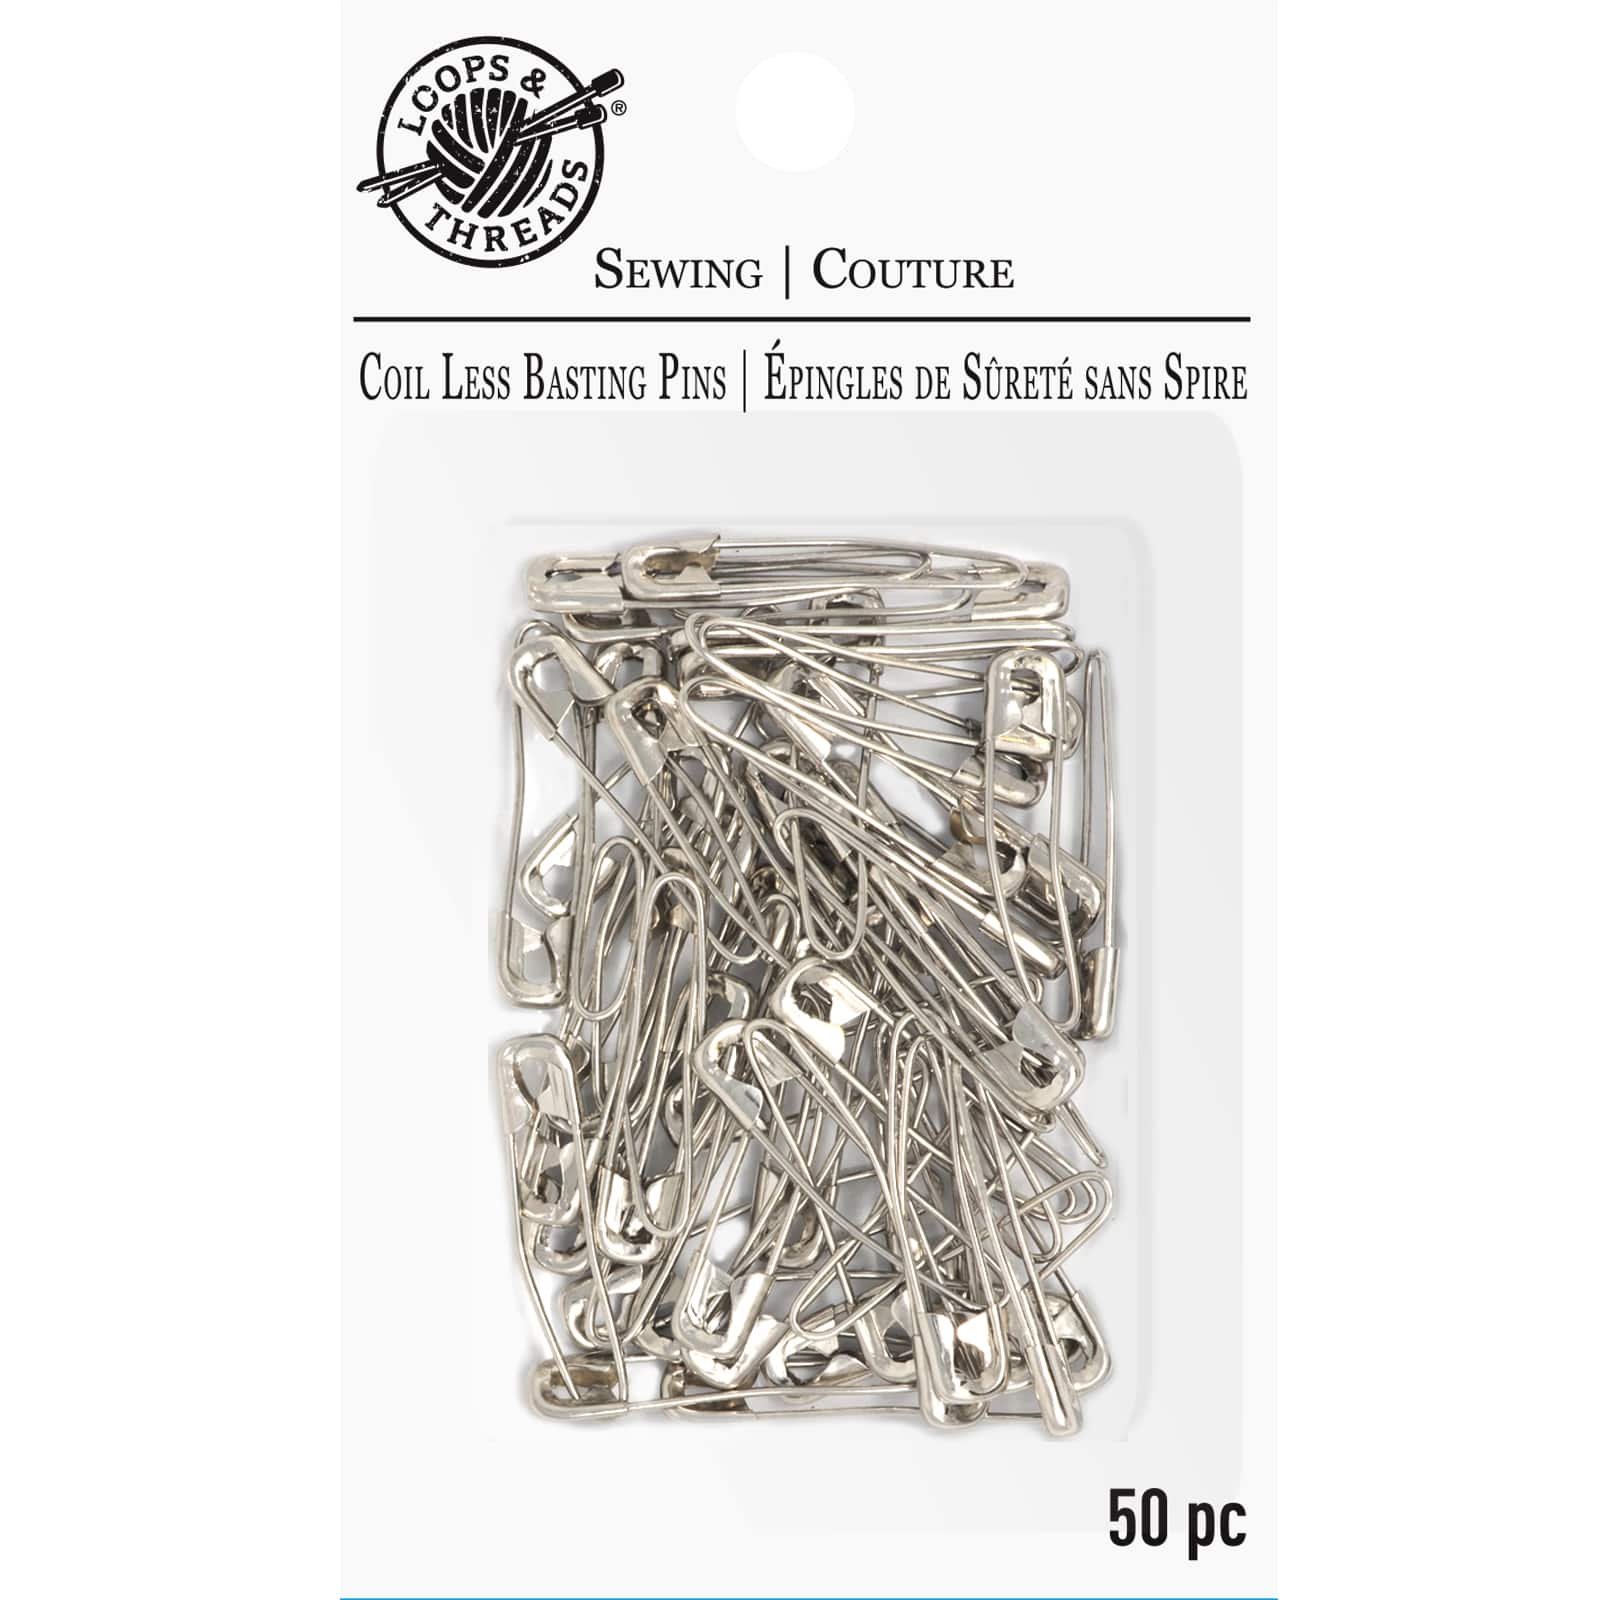 michaels safety pins